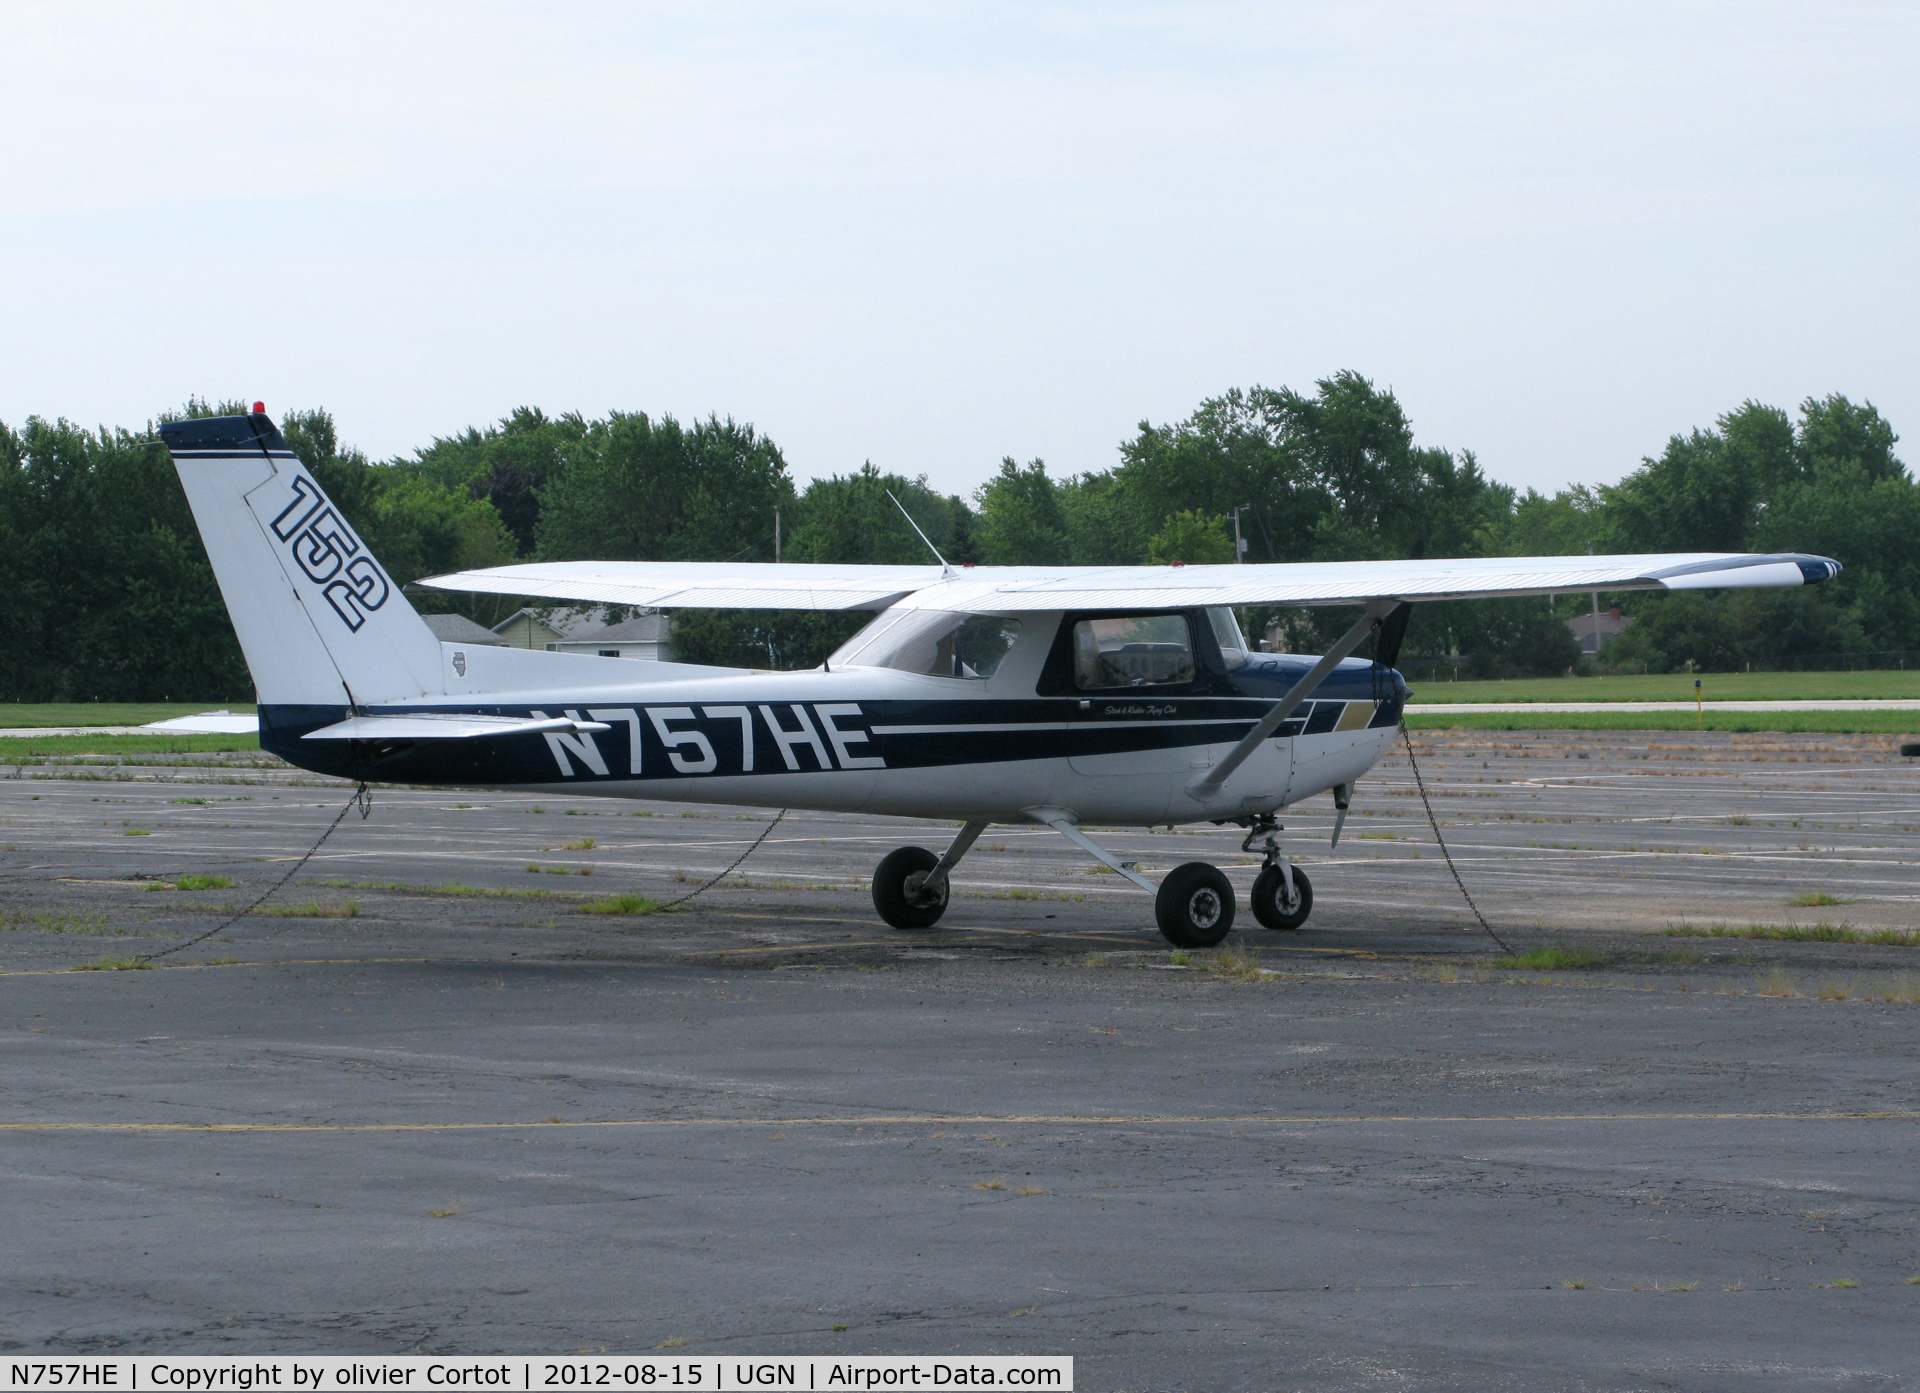 N757HE, 1977 Cessna 152 C/N 15279746, learn to fly here !